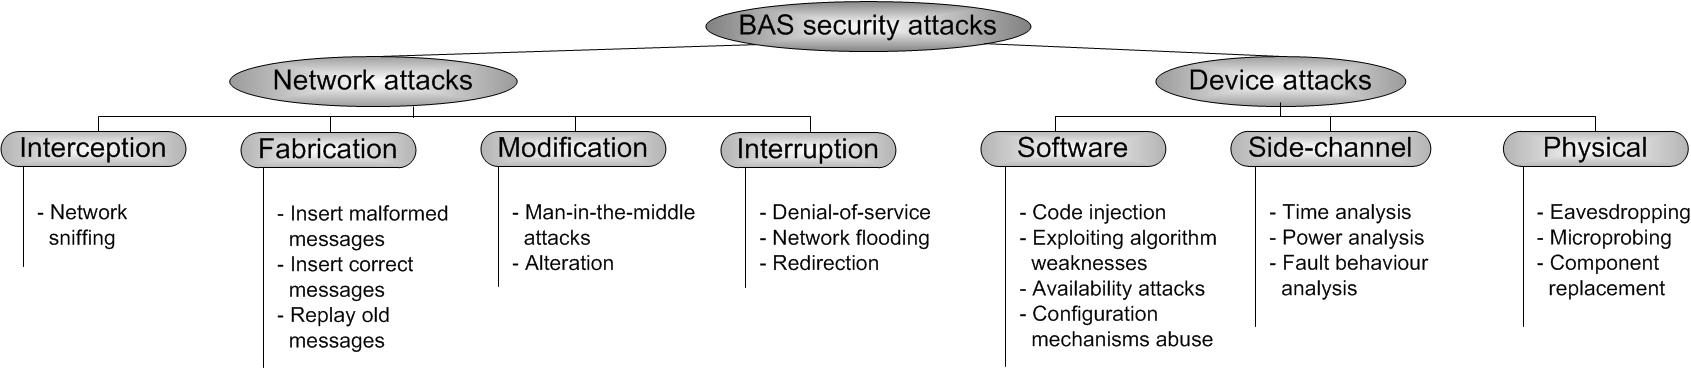 Attacks in building automation systems